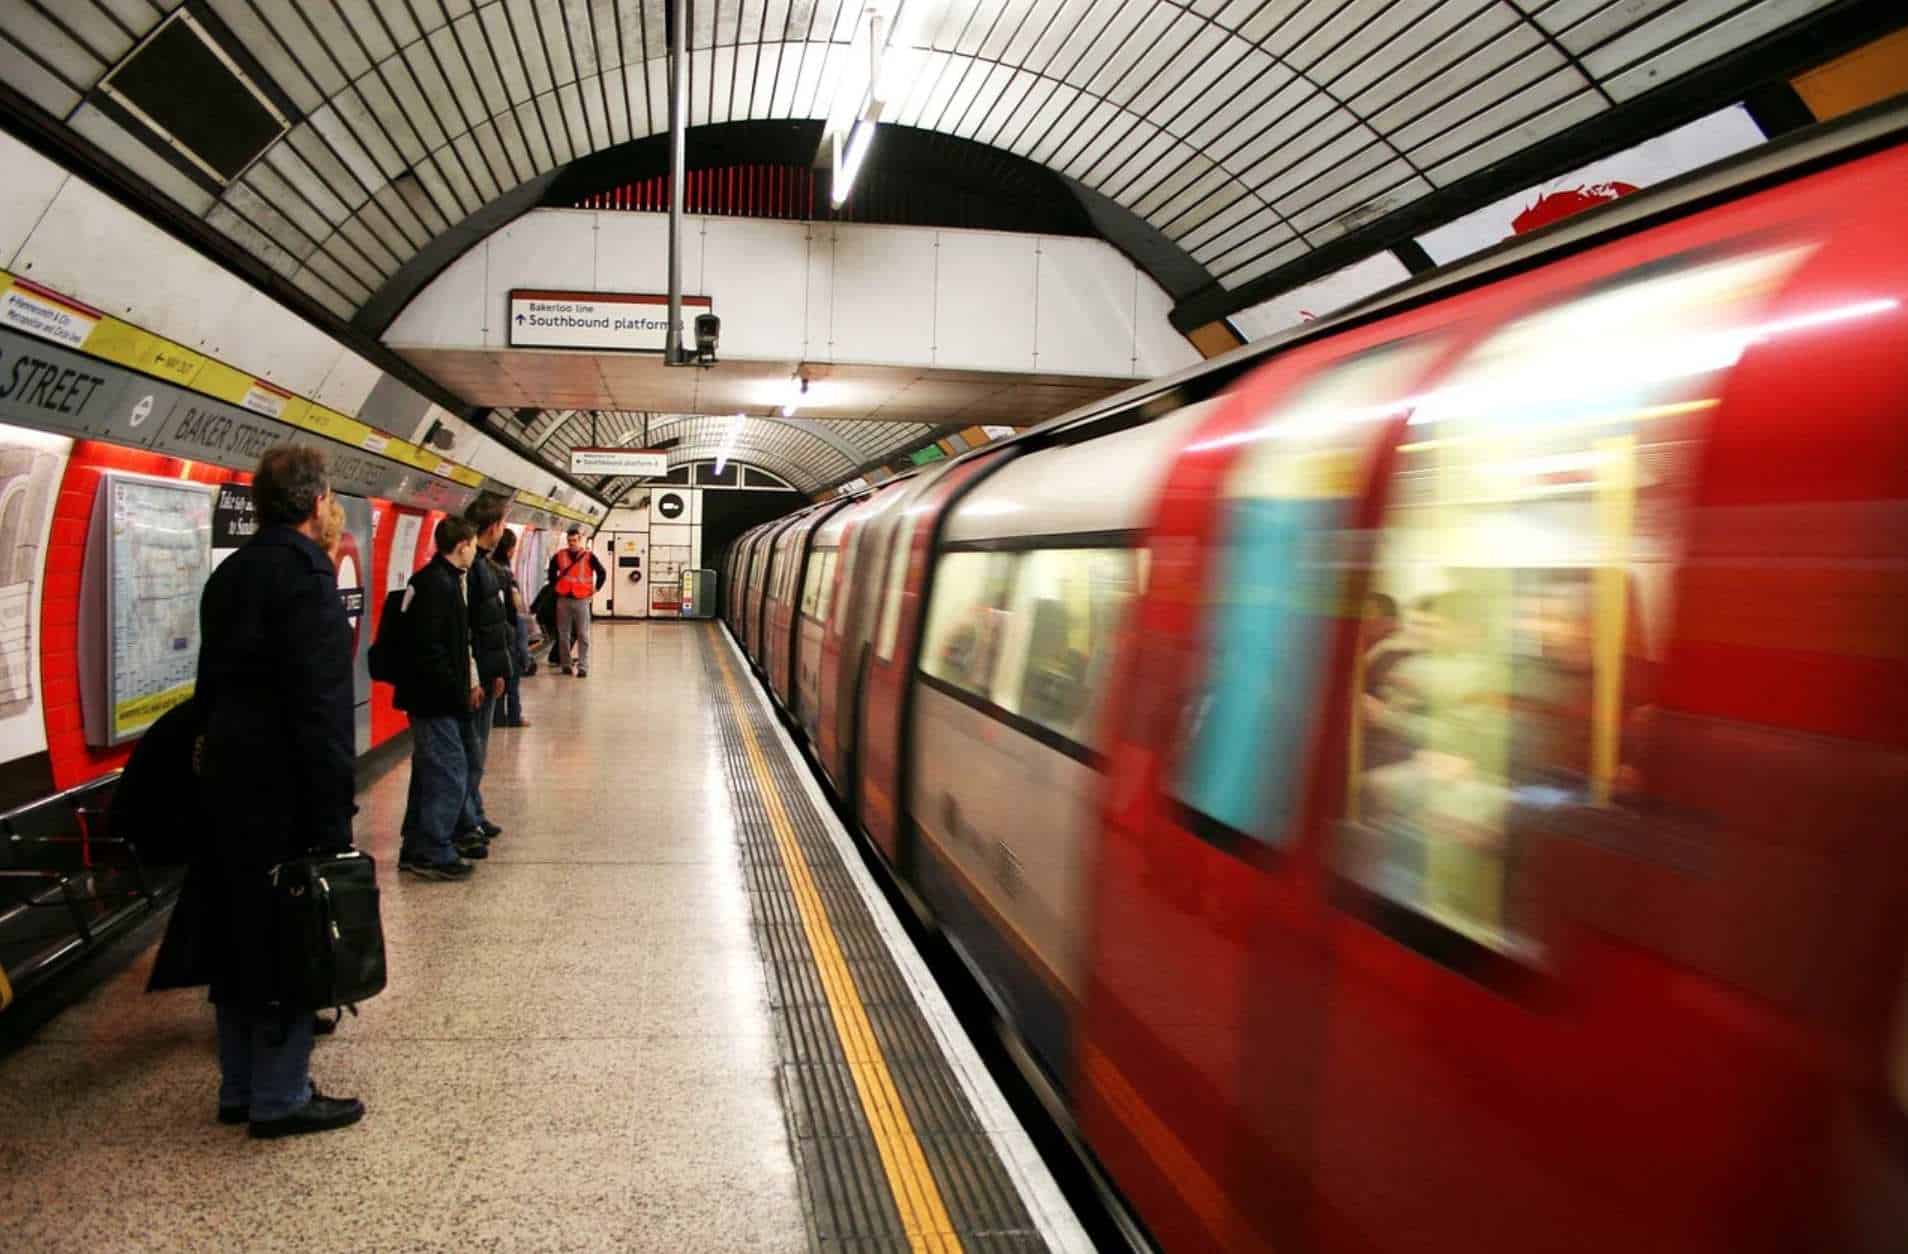 People stand waiting at Baker Street tube station while a tube rushes past